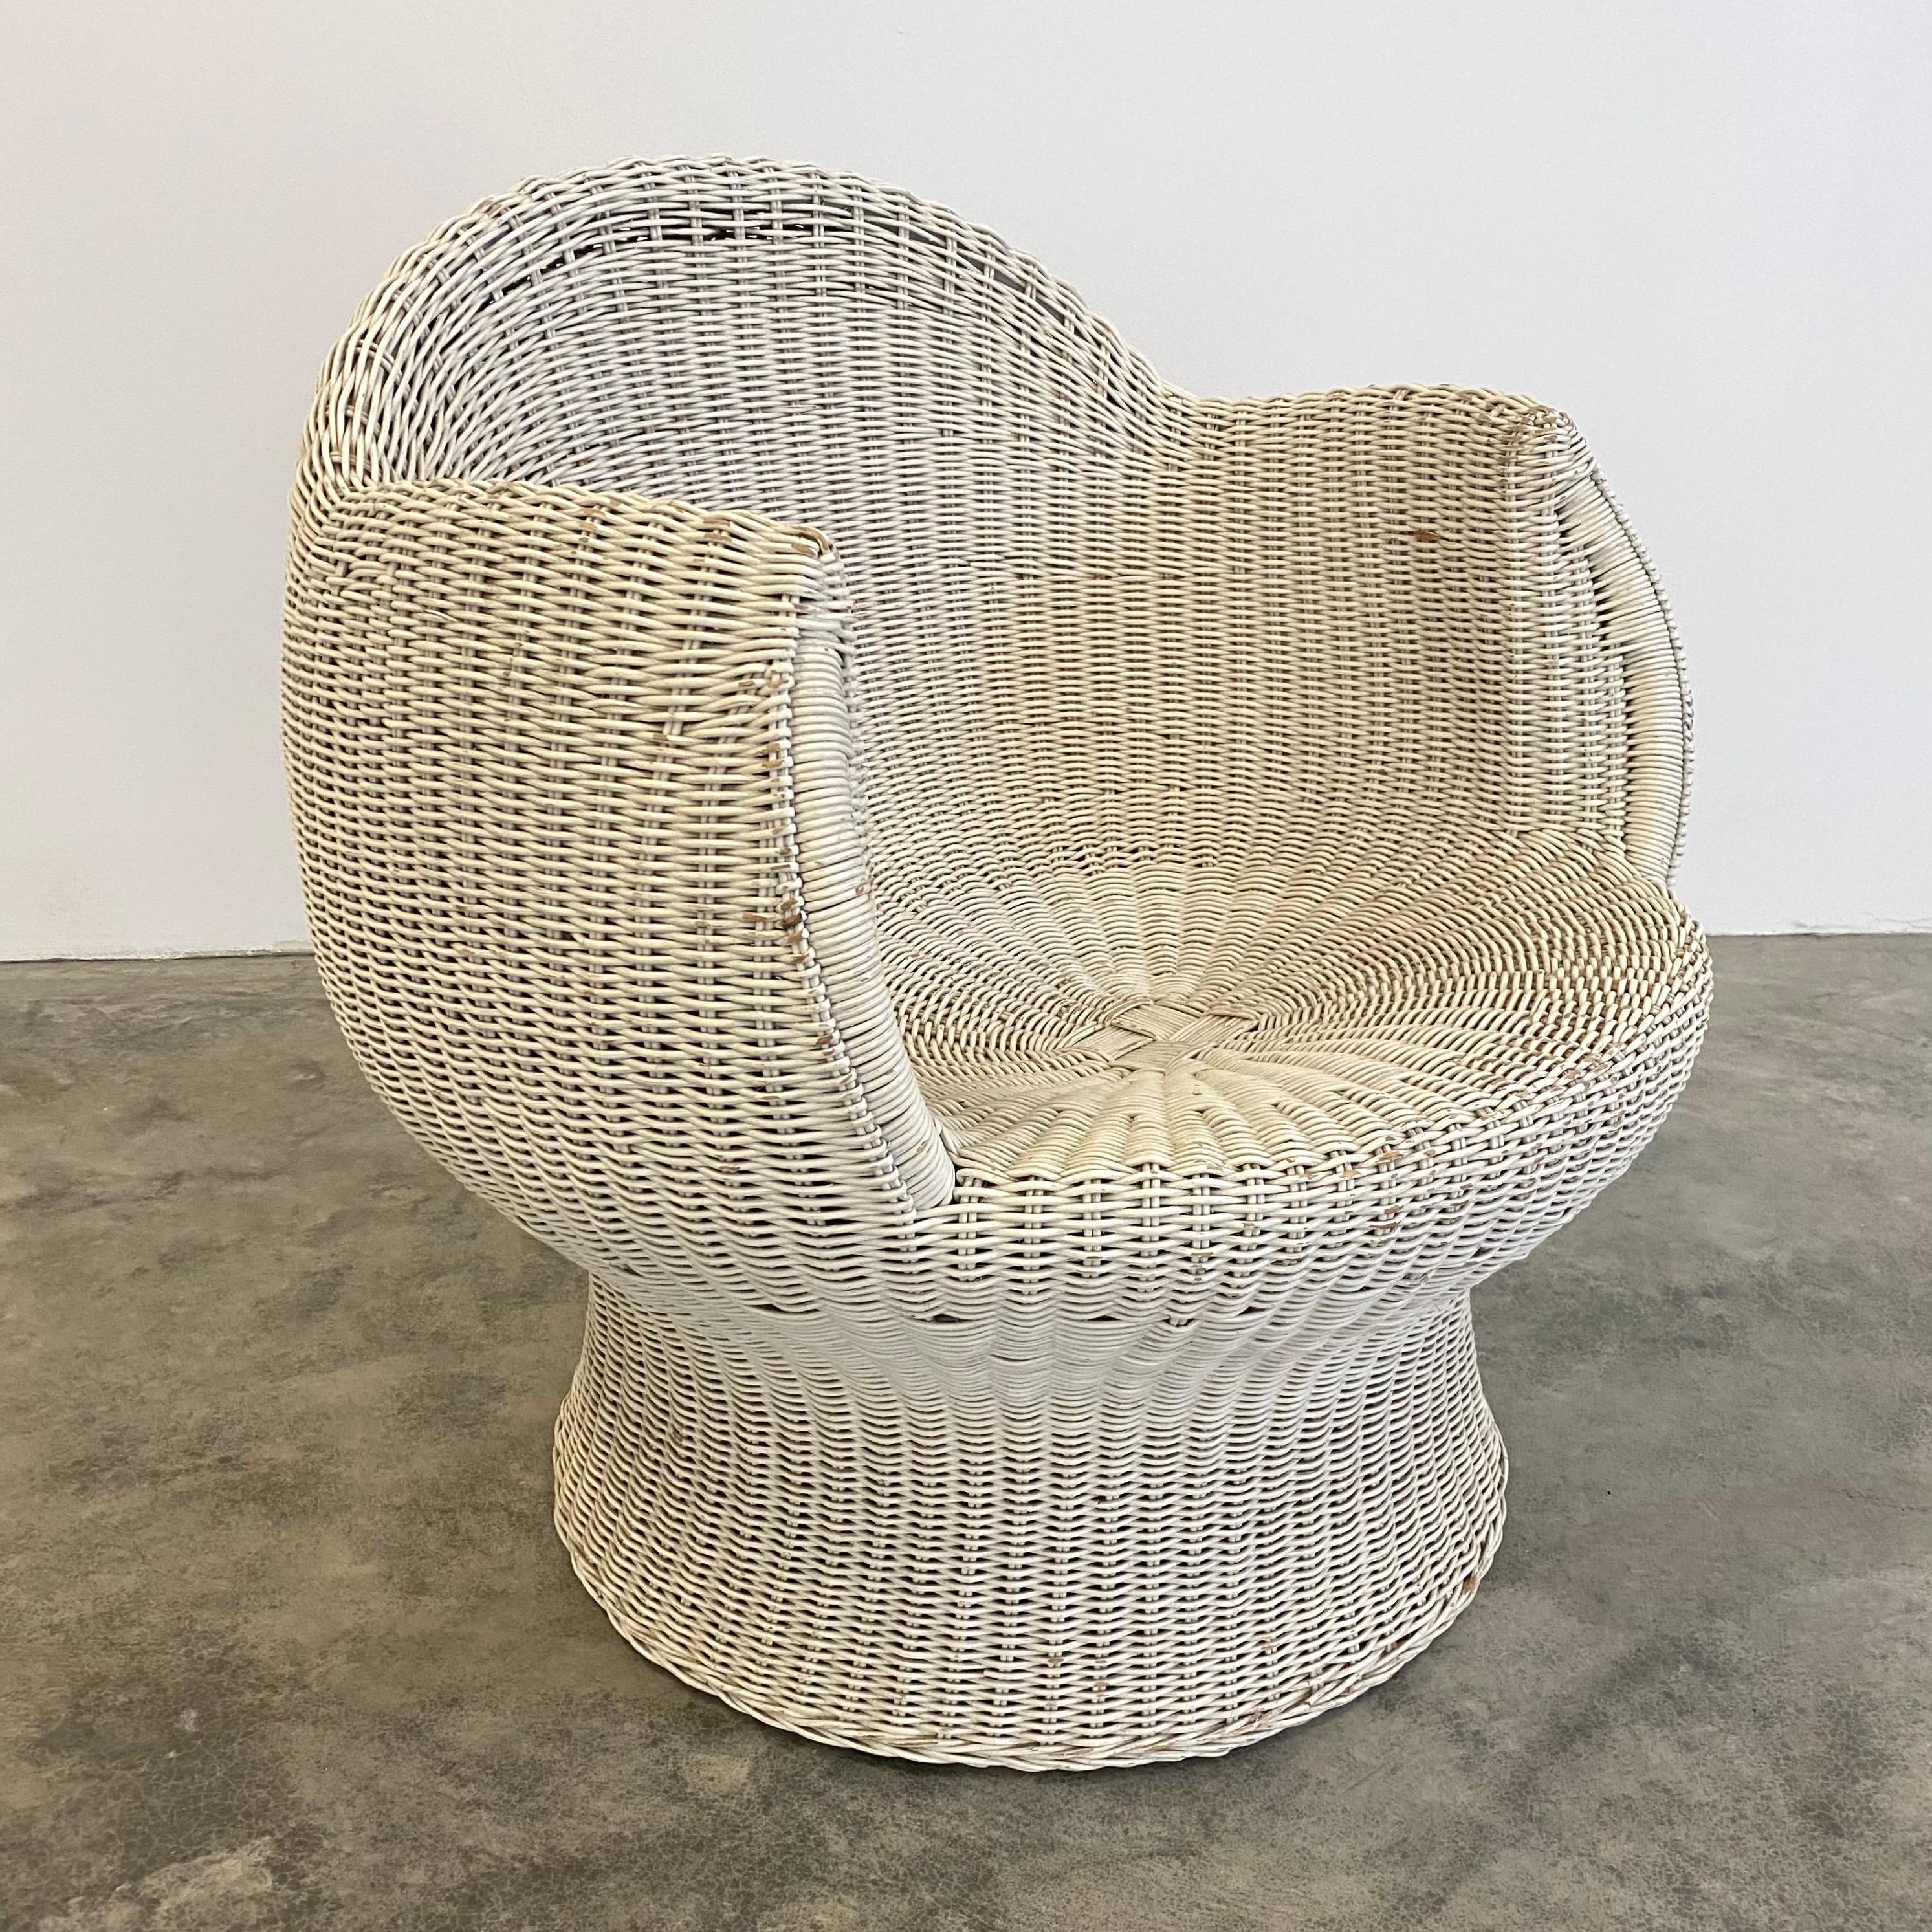 Sculptural pair of French wicker chairs. Circa 1960s. Featuring a woven white wicker frame. Great unusual shape. Good vintage condition. Wear as shown.
 